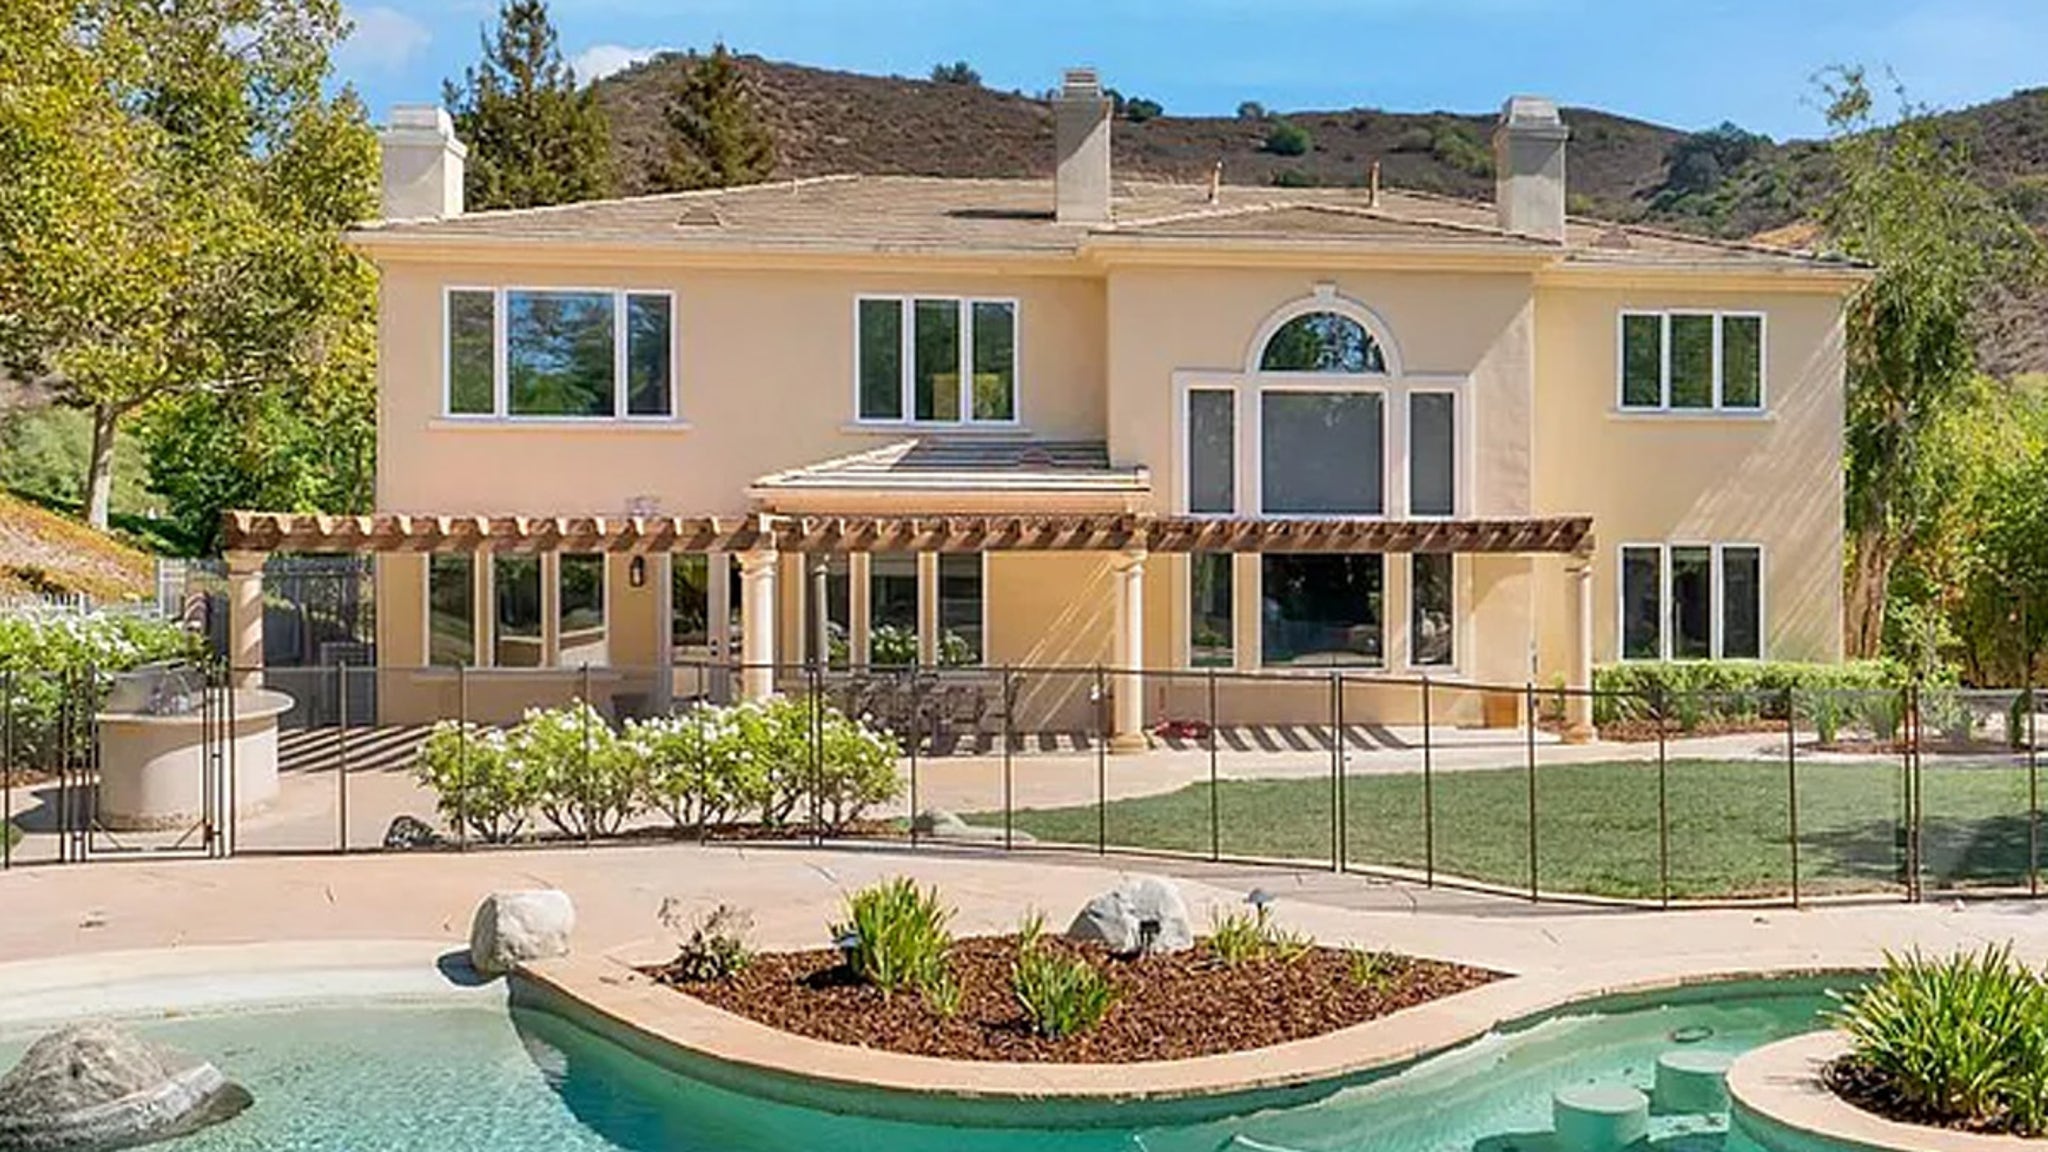 Lamar Odom Planting Roots Back In CA, Renting Bachelor Pad